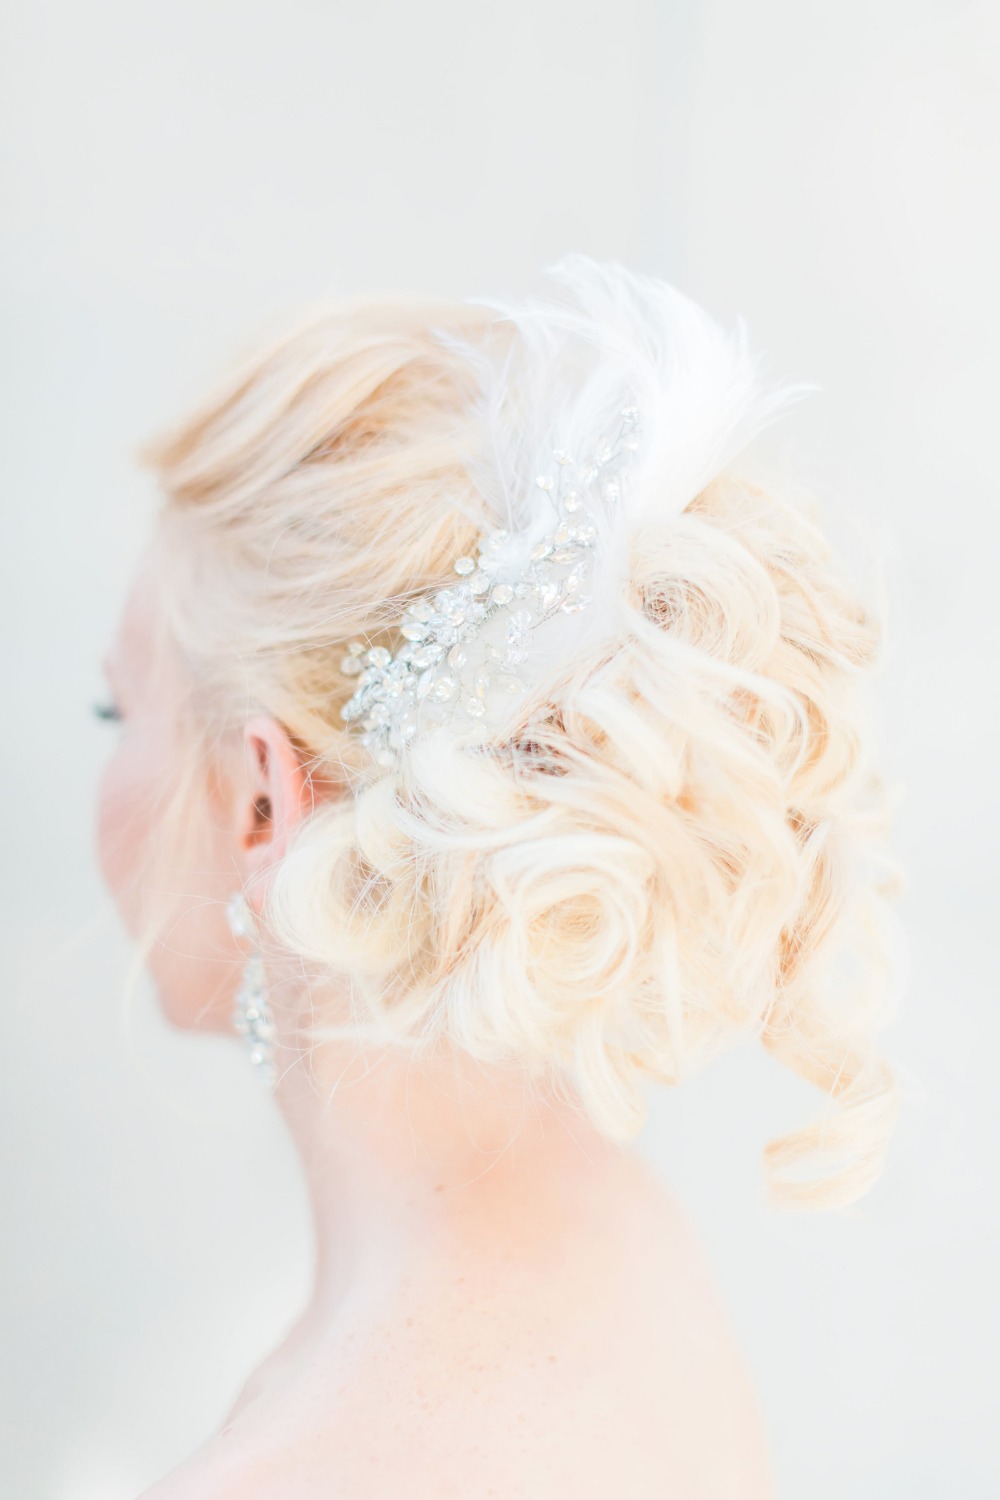 Feather and crystal hair accessory